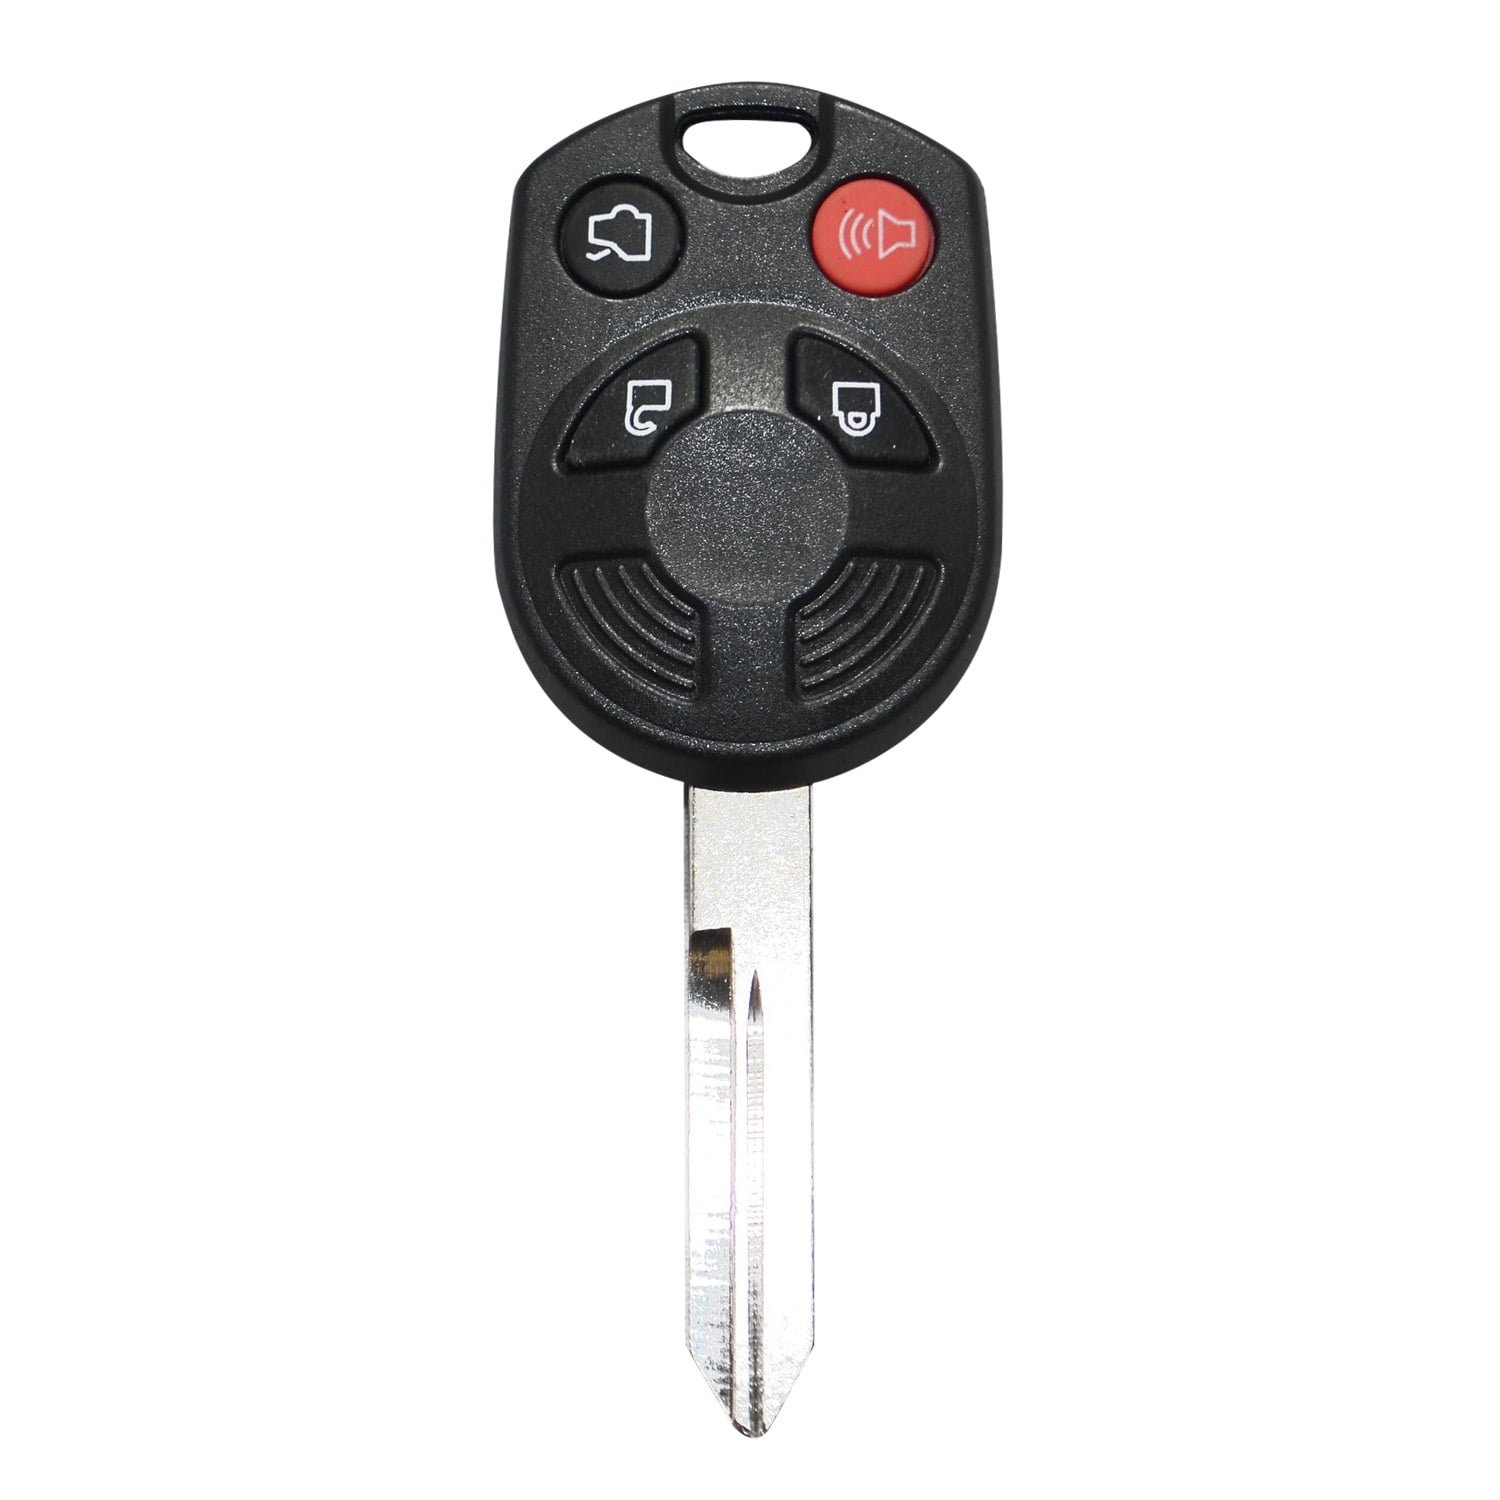 2 KeylessOption Replacement Remote Head Ignition Key Keyless Entry Combo Compatible with CWTWB1U793 